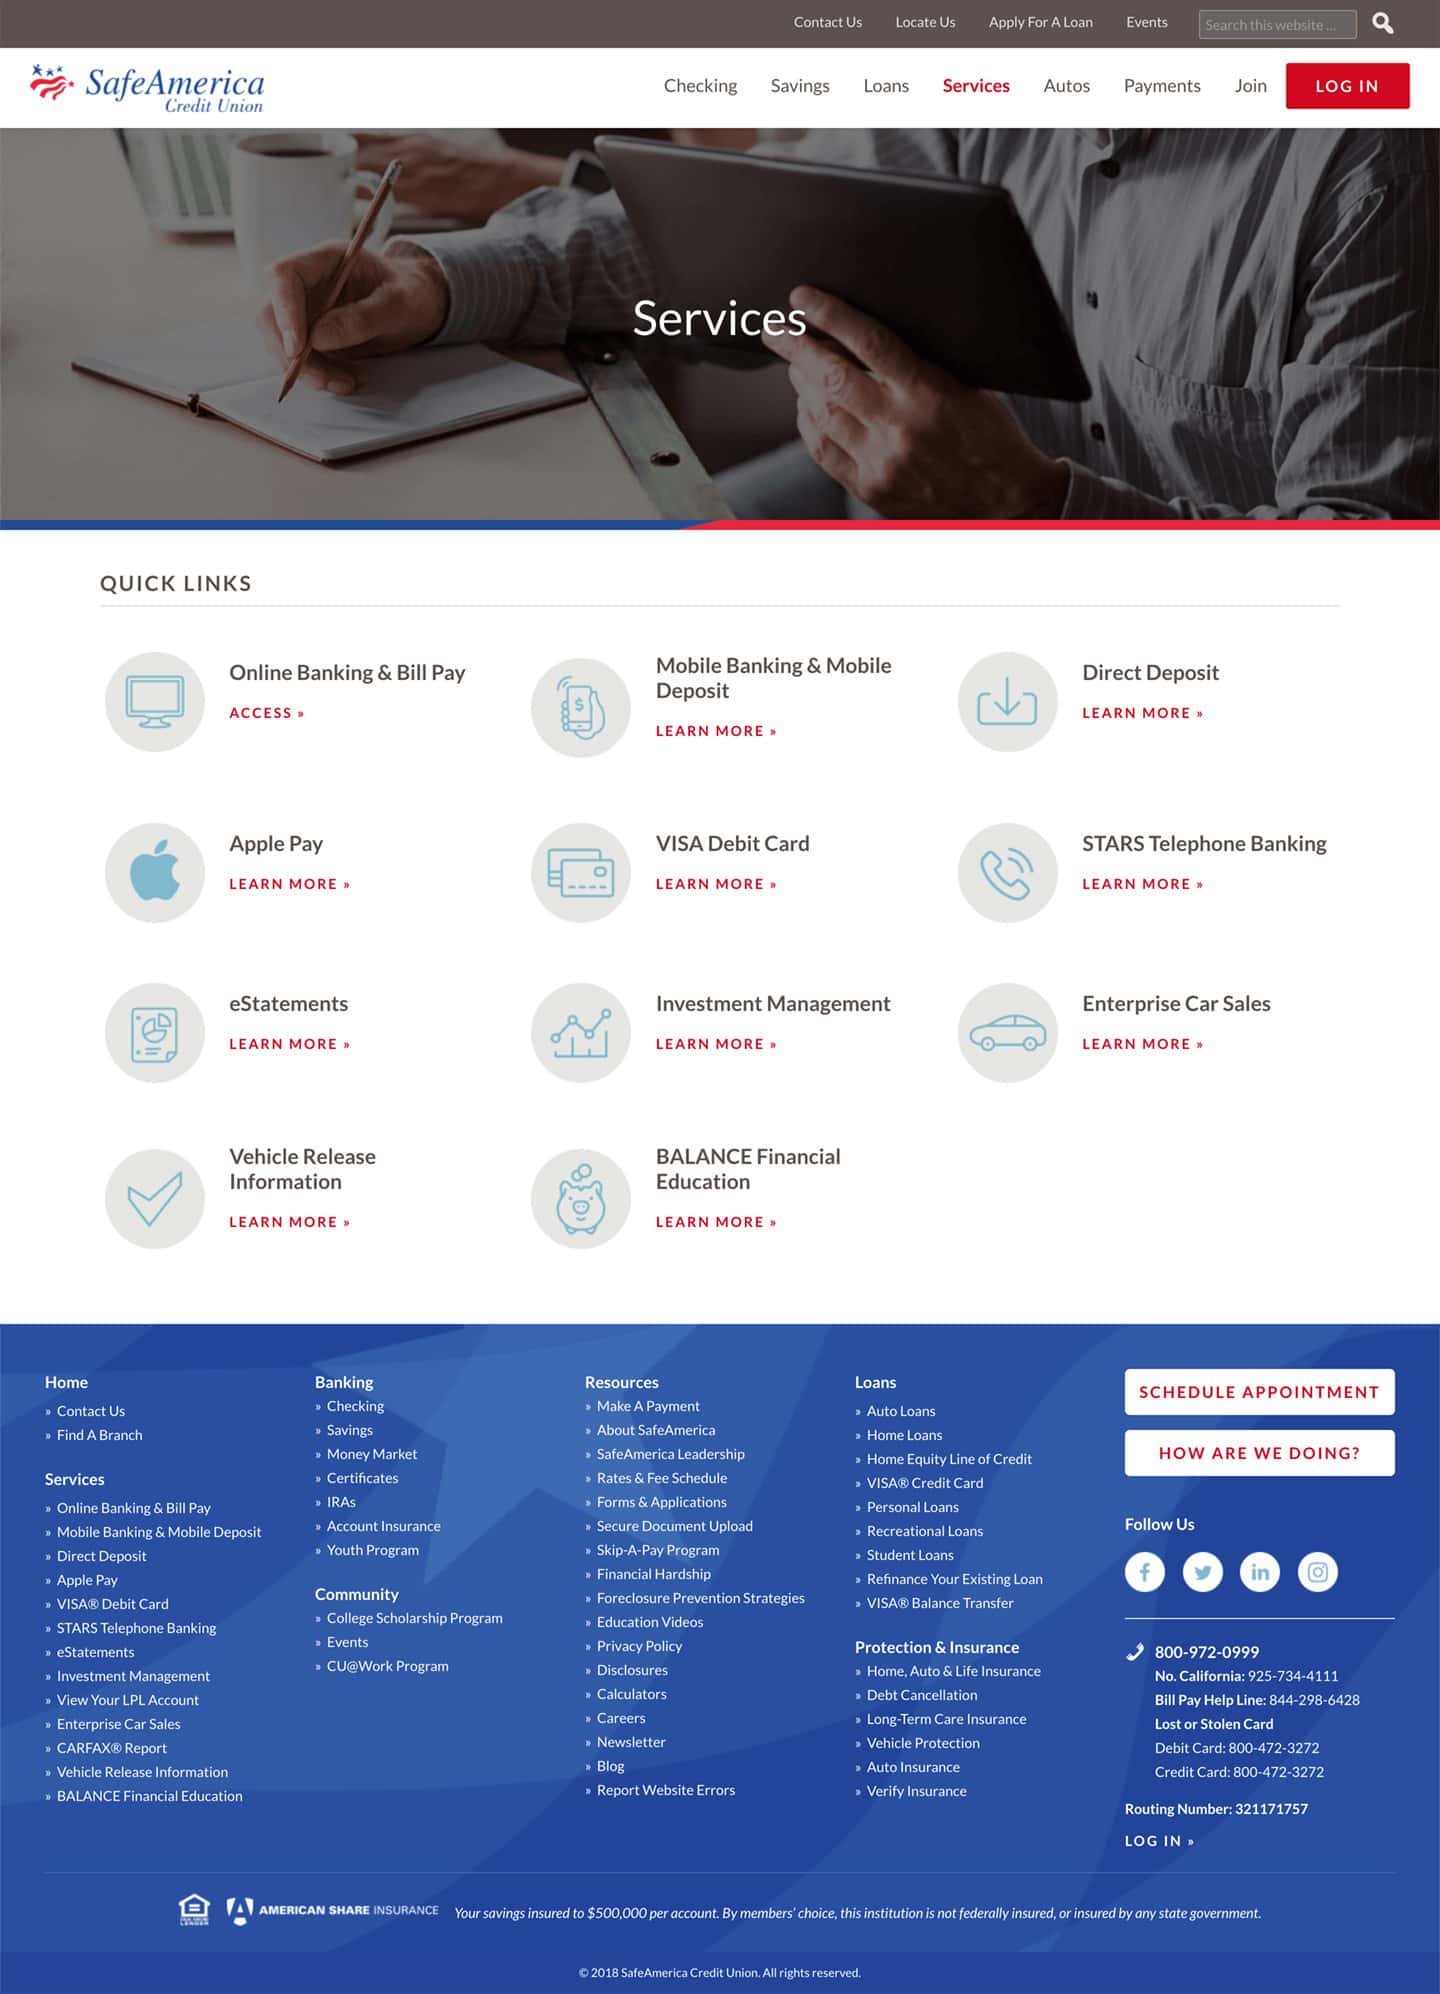 SafeAmerica Services Page